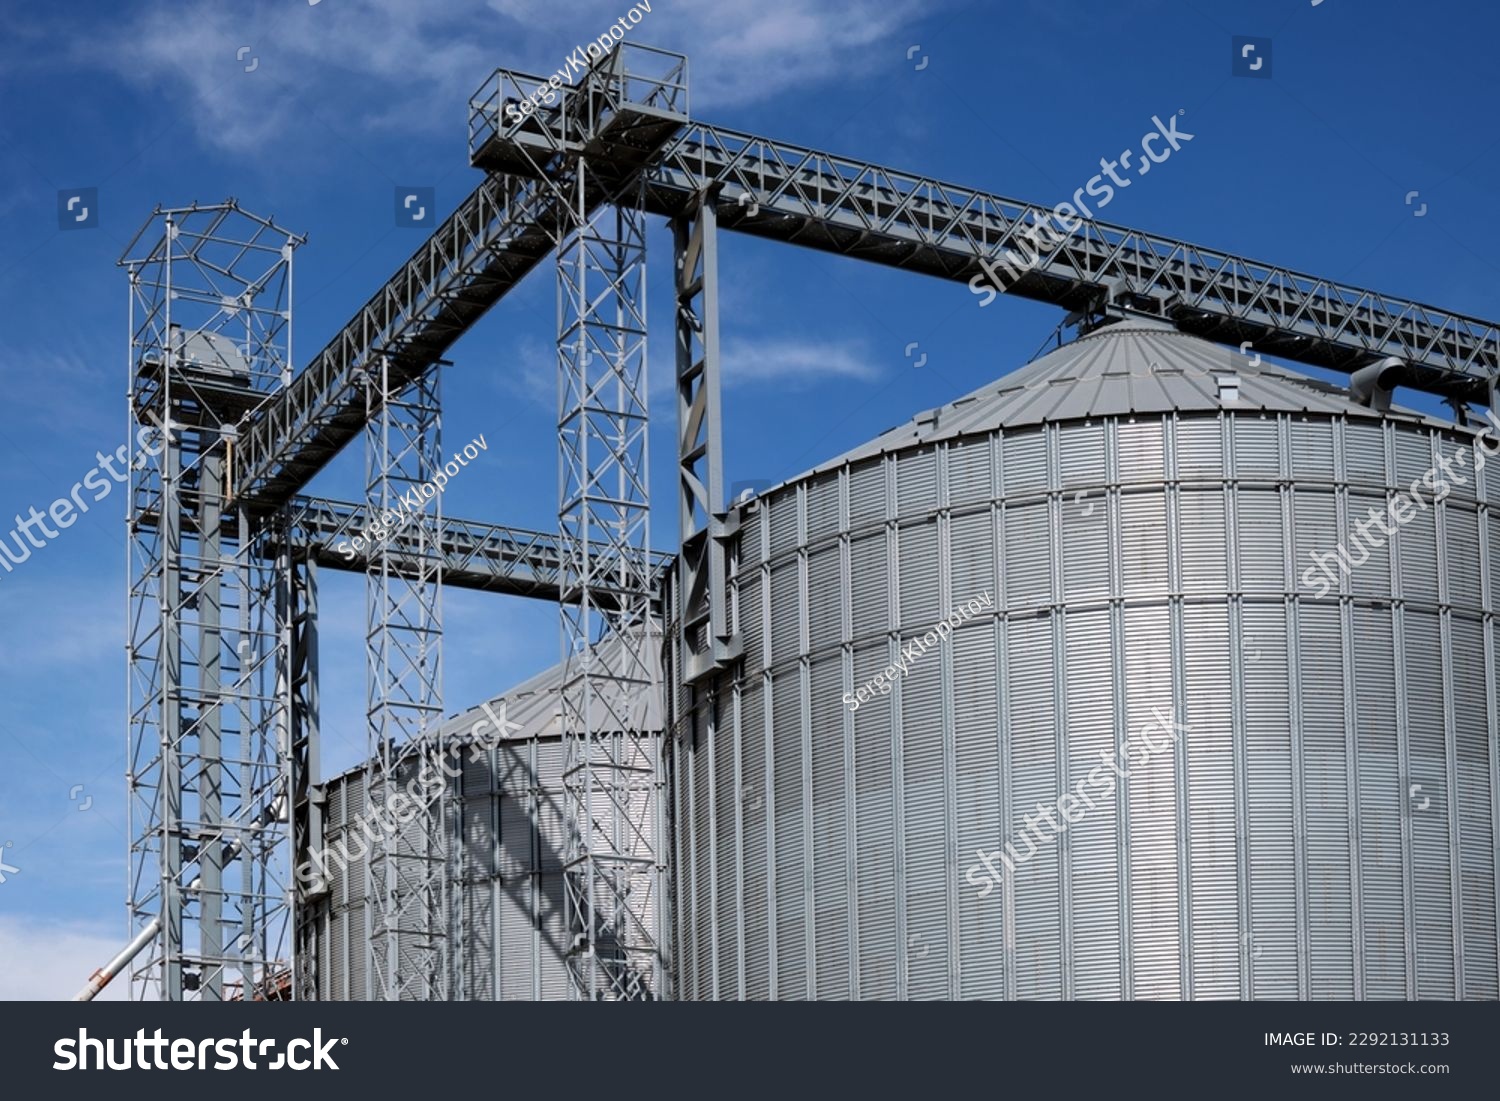 Industrial facilities of feed and flour mills. Close-up of steel grain storage silos with conical bottom, can be used for various purposes. #2292131133